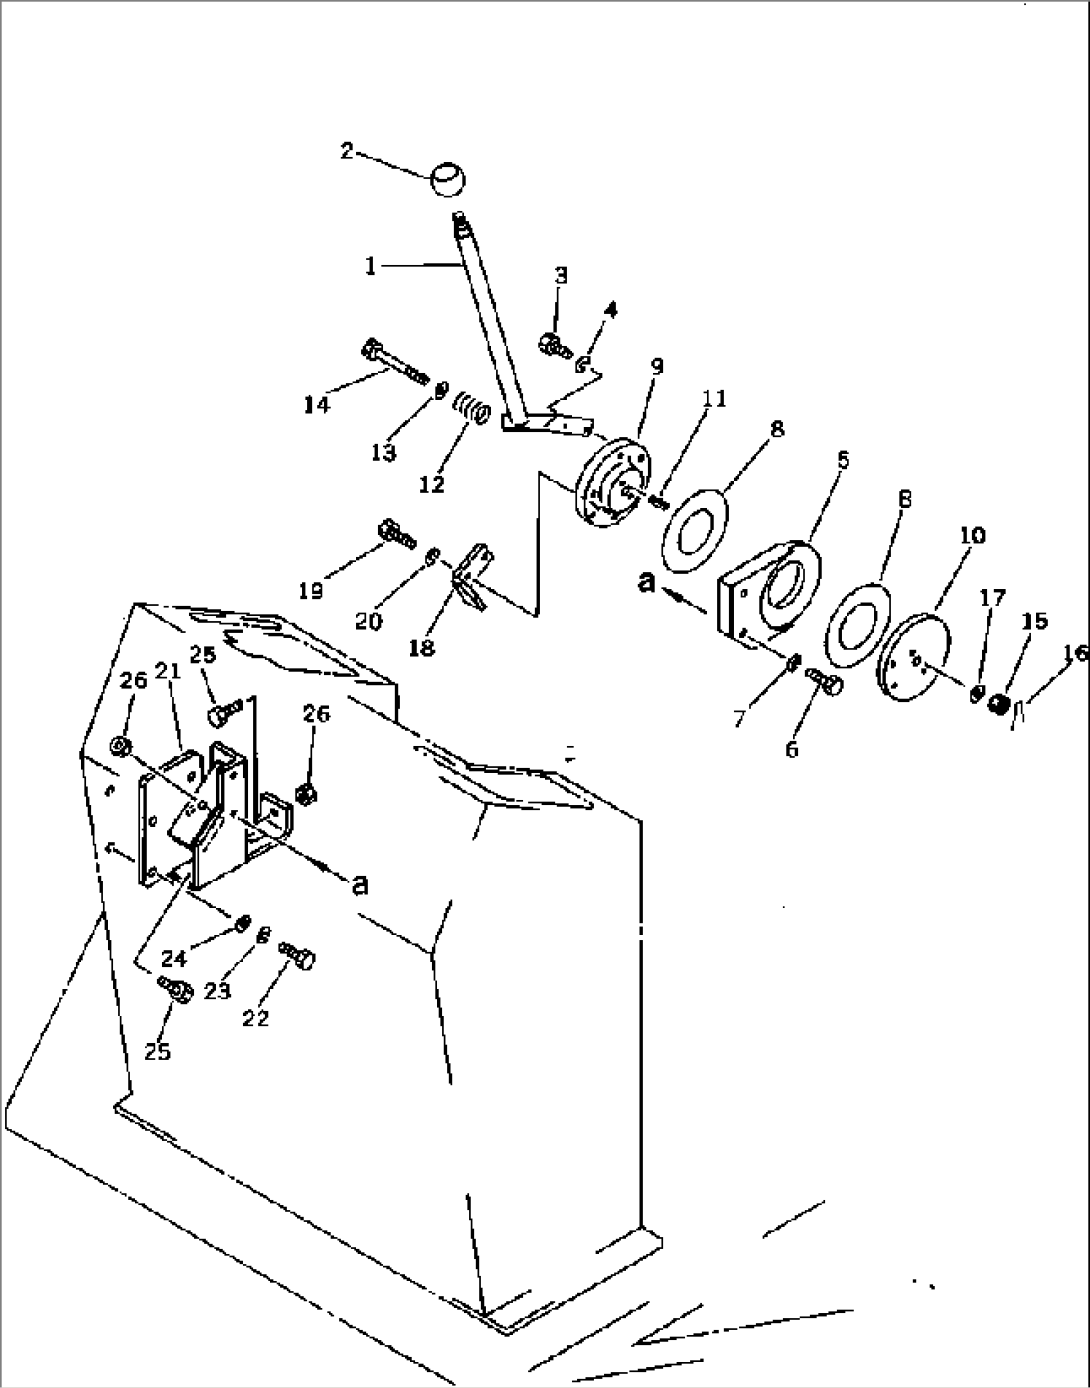 HYDRAULIC CONTROL LEVER (FOR ROTOR)